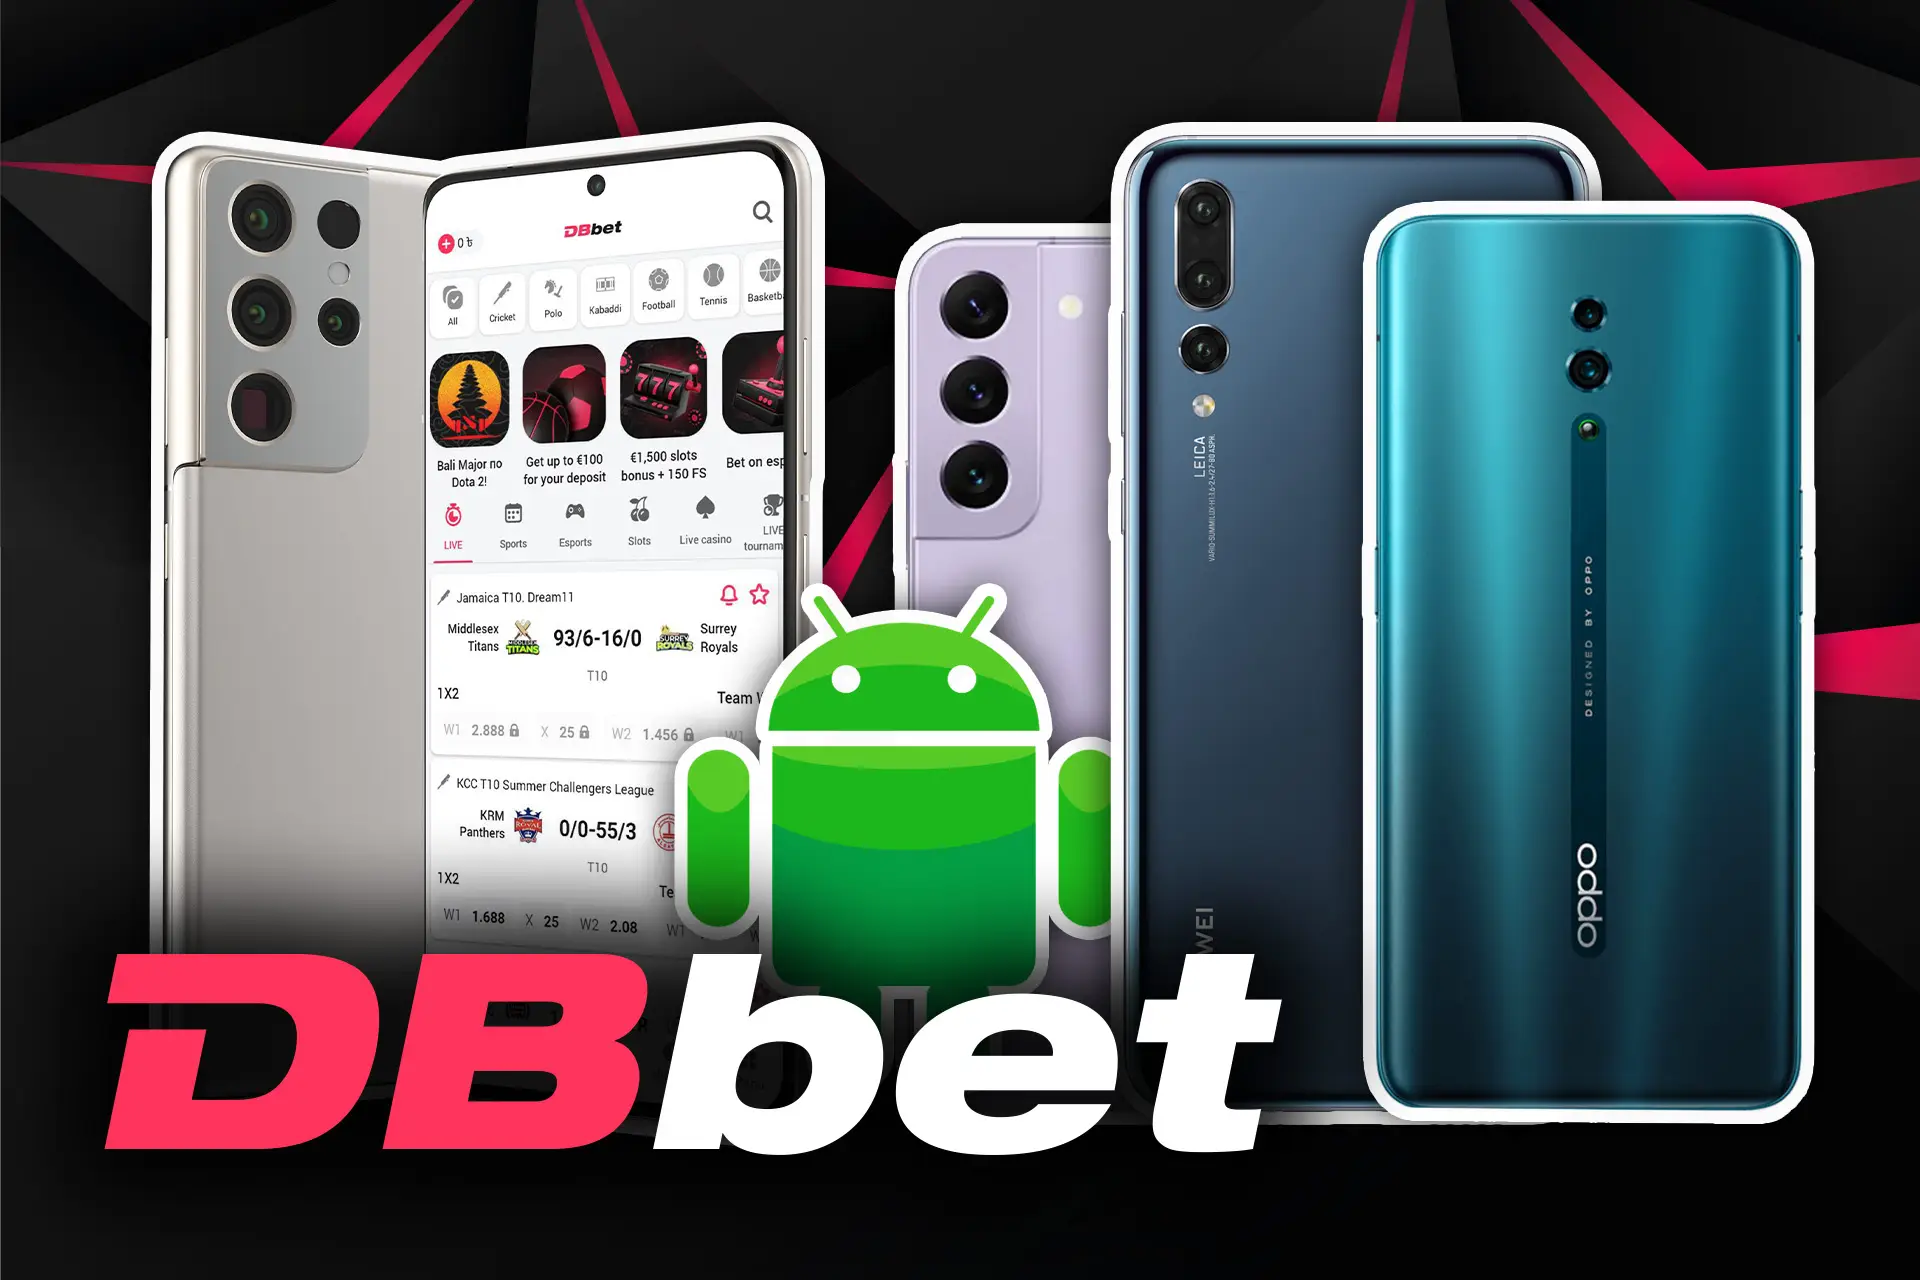 You can install the DBbet app on many different Android devices.